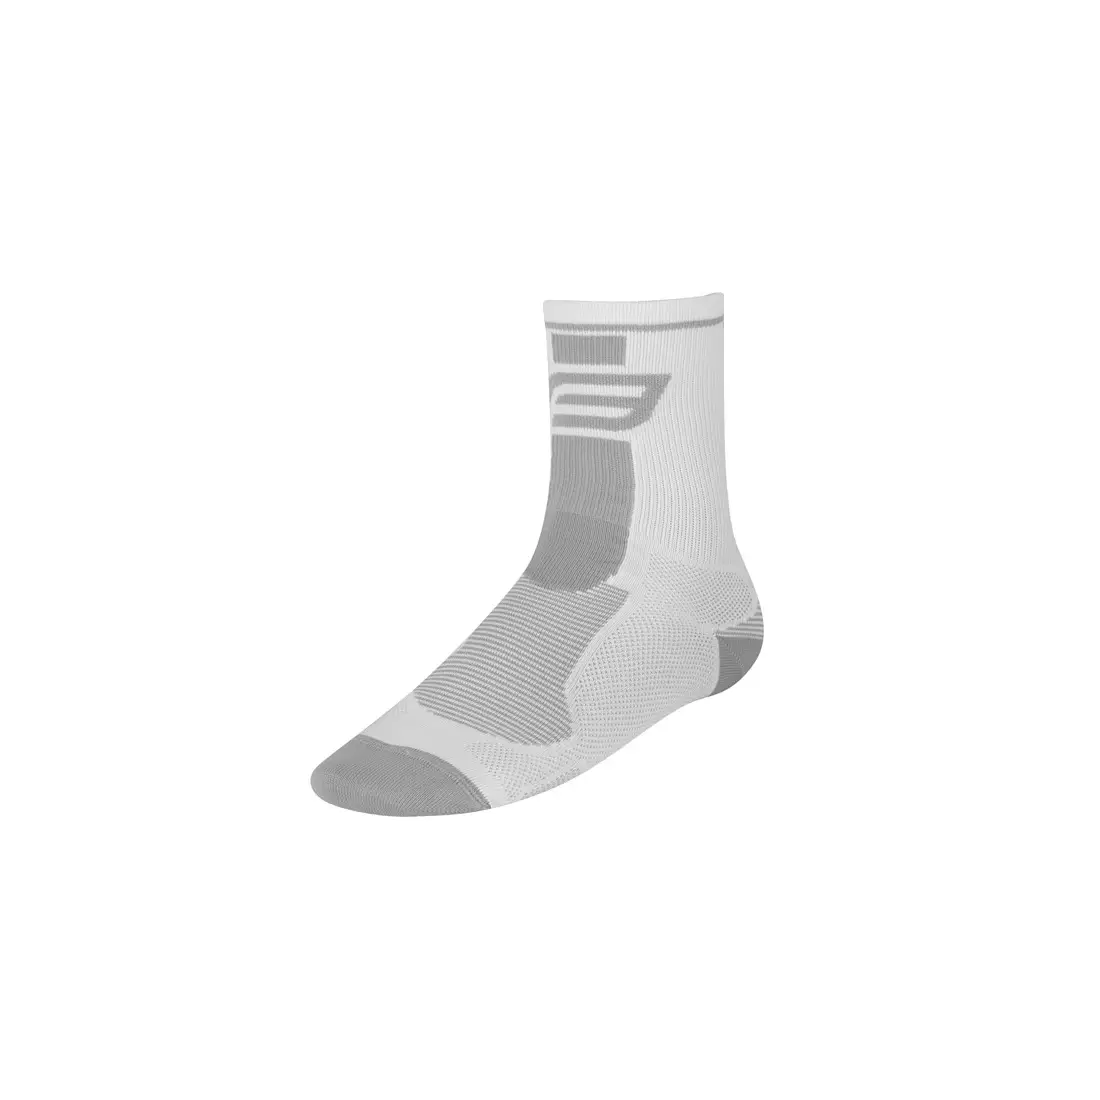 FORCE LONG sport socks white and grey 